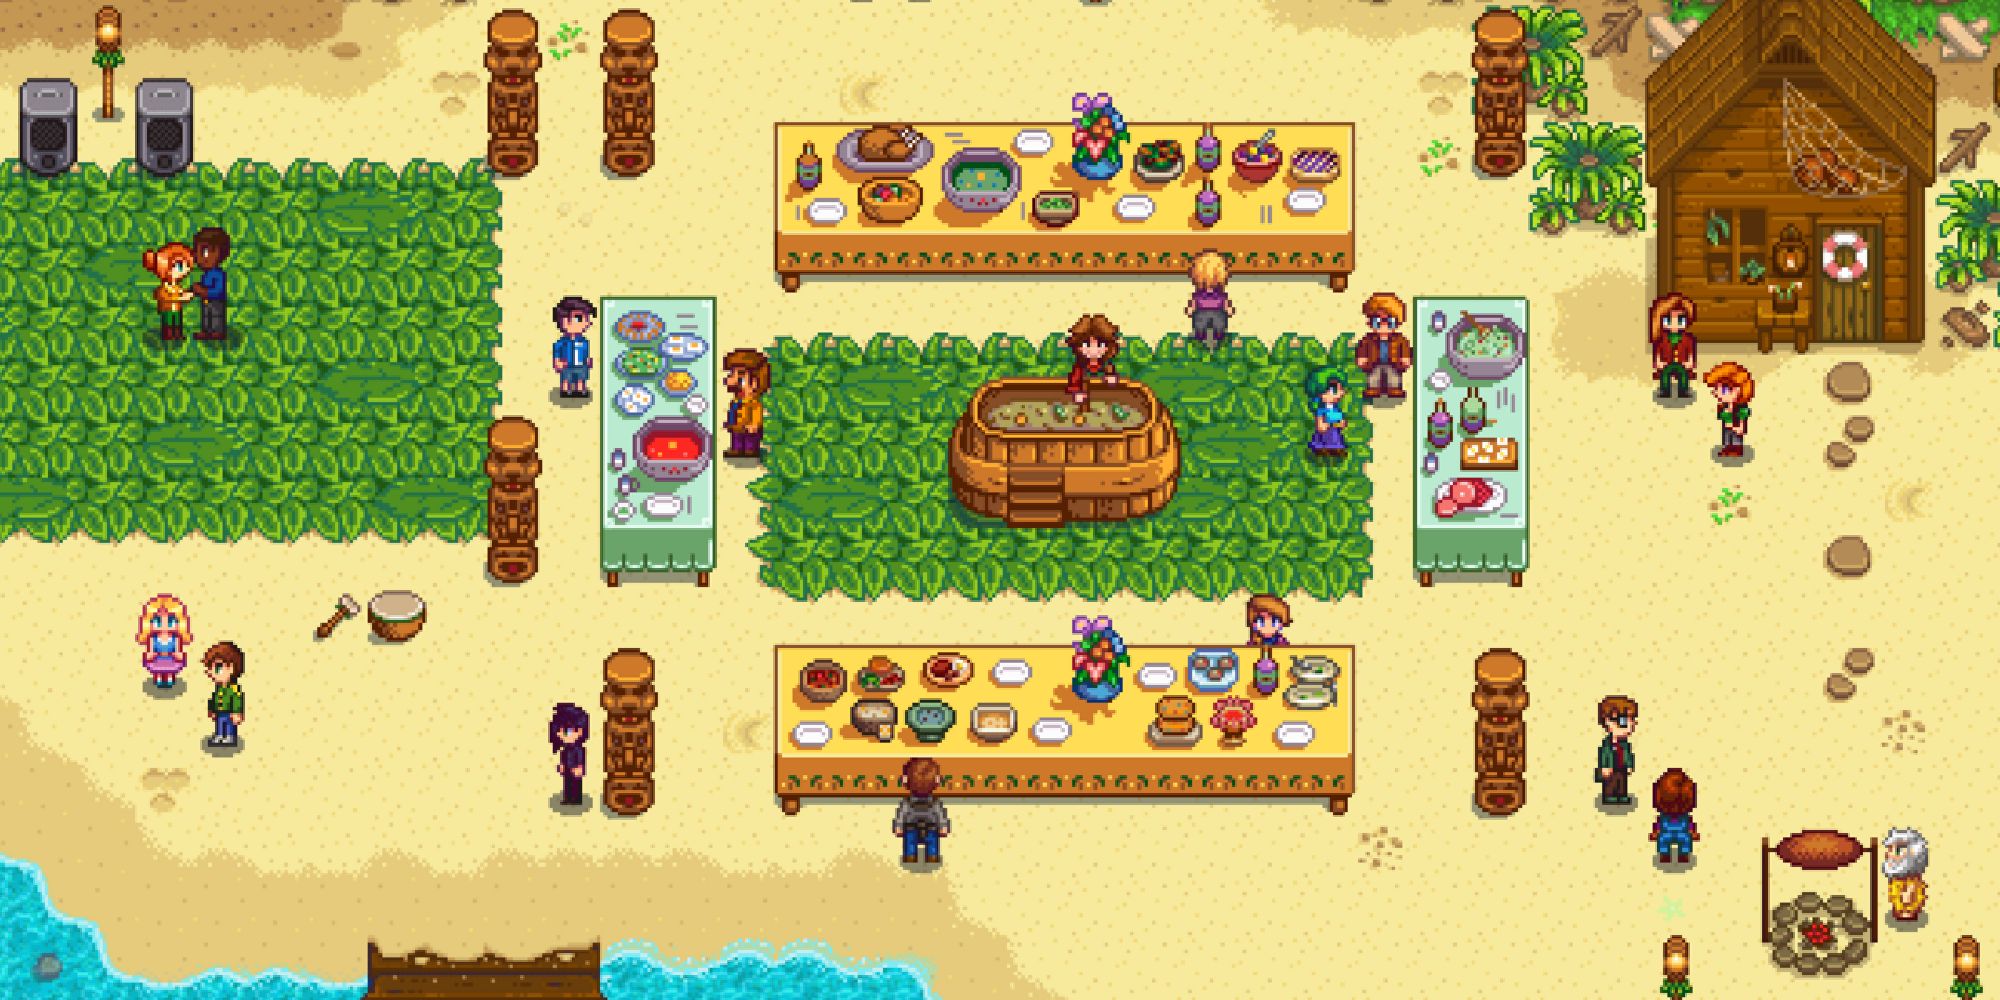 An image of the Luau event in Stardew Valley, where the entire town gathers at the beach for a feast.